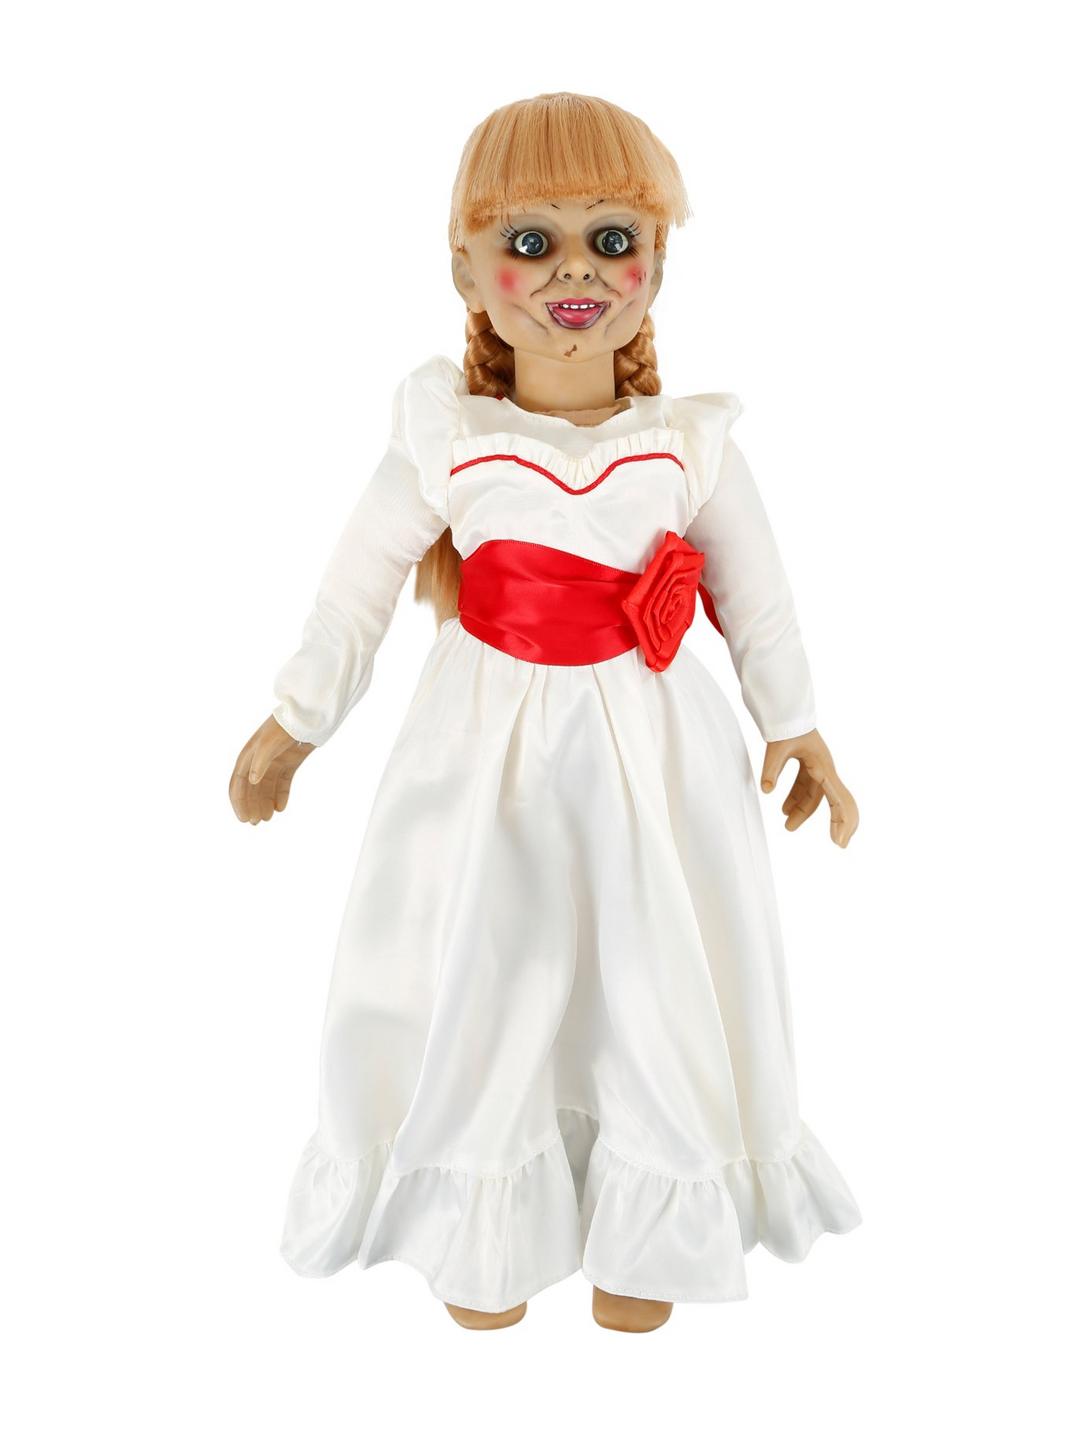 Annabelle Scaled Prop Replica Doll, , hi-res